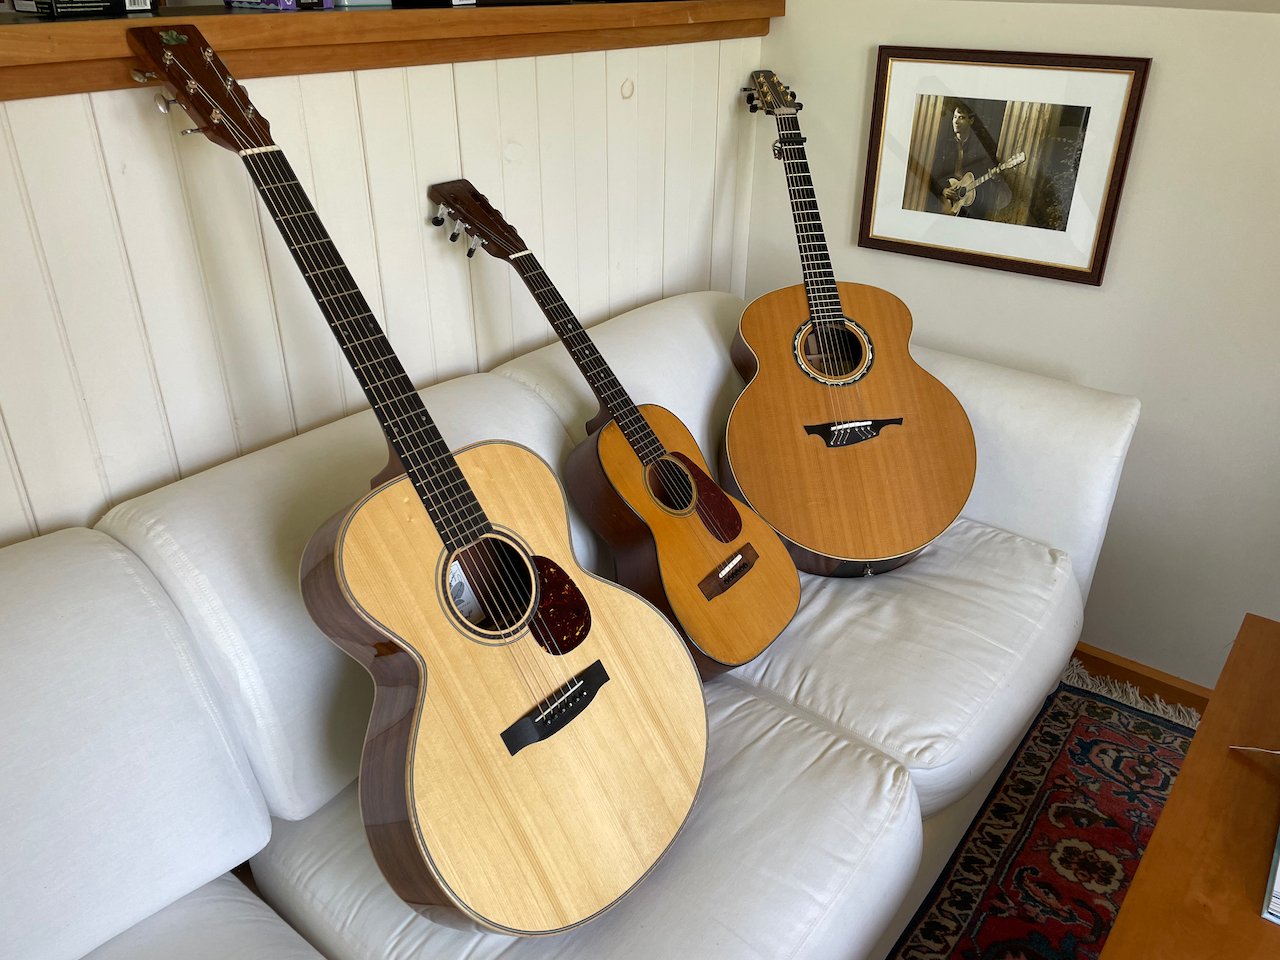  Ackerman’s Froggy Bottom Model K signature model, Martin 5-18, and Klein M-43, with John Fahey watching over.  